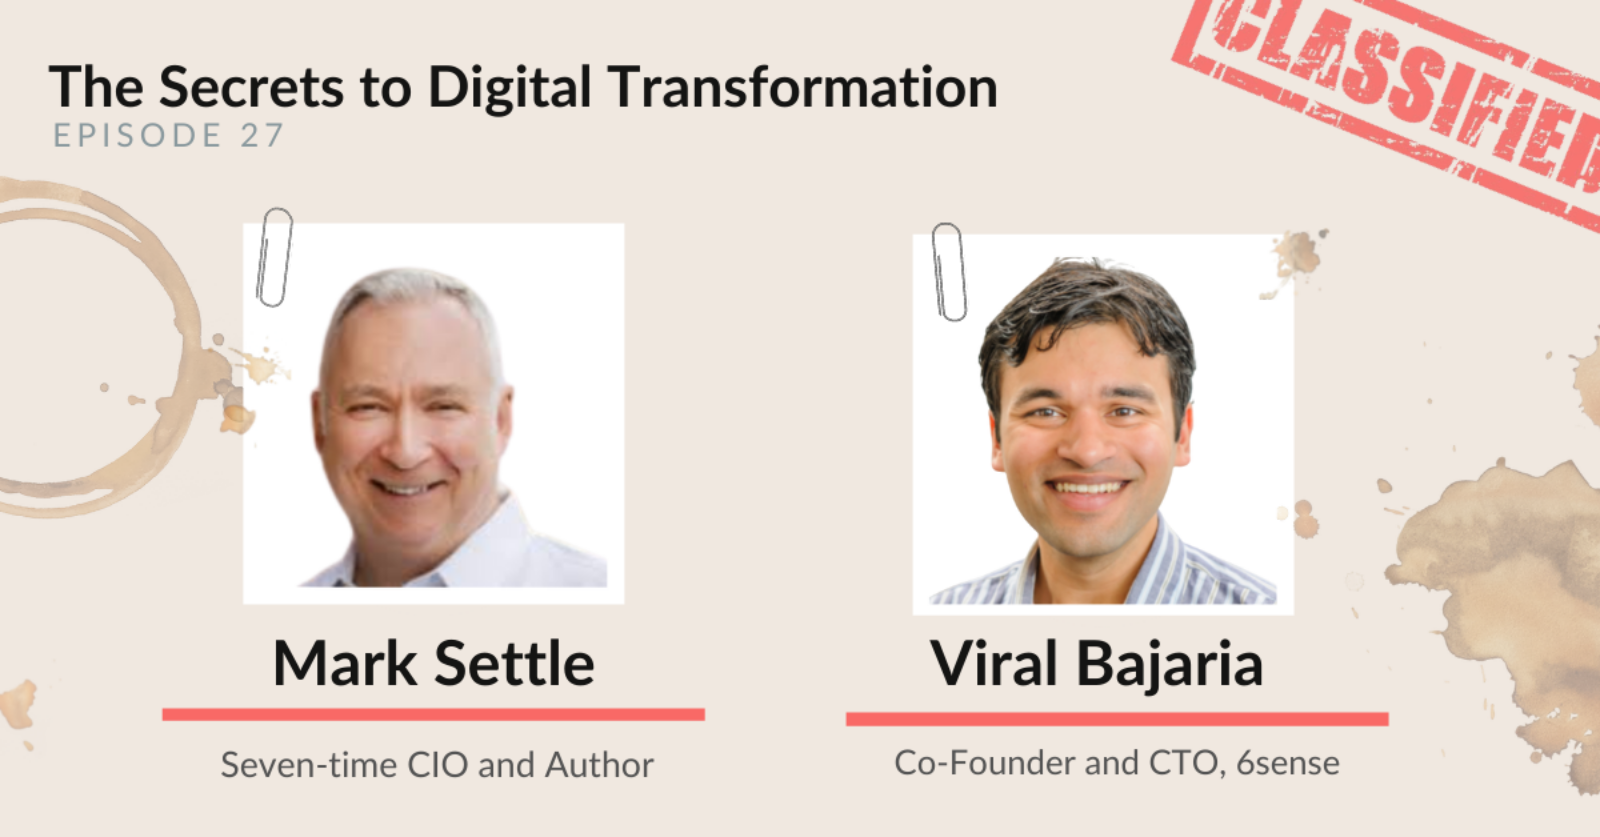 THE SECRETS TO DIGITAL TRANSFORMATION WITH MARK SETTLE, SEVEN-TIME CIO AND AUTHOR, AND VIRAL BAJARIA, CO-FOUNDER AND CTO, 6SENSE